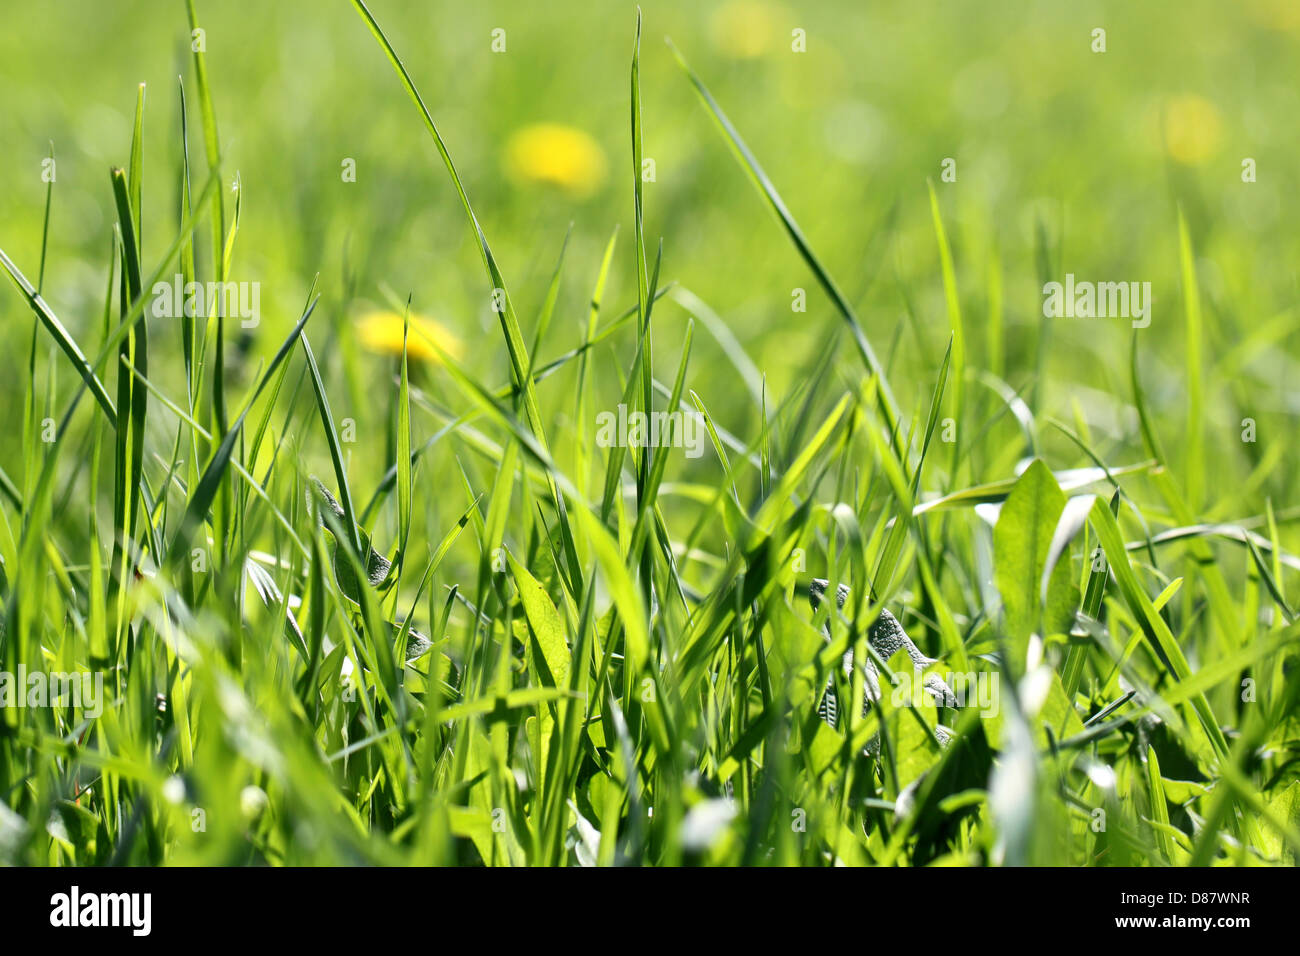 Green grass in a field on a background of flowers Stock Photo